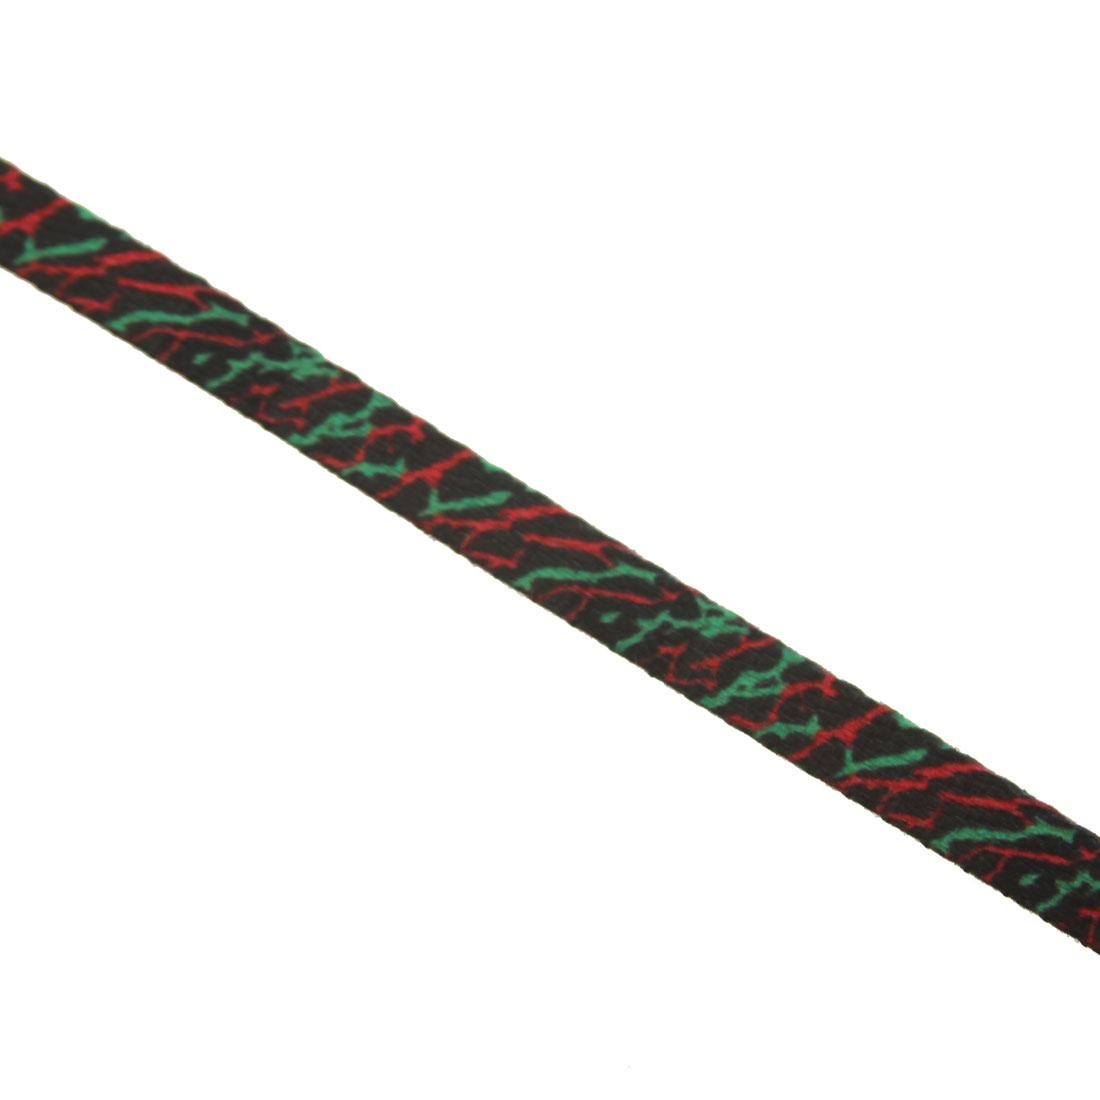 Tribe Shoelaces shoestrings 0036-45Inch-1S $6 Starks Laces 